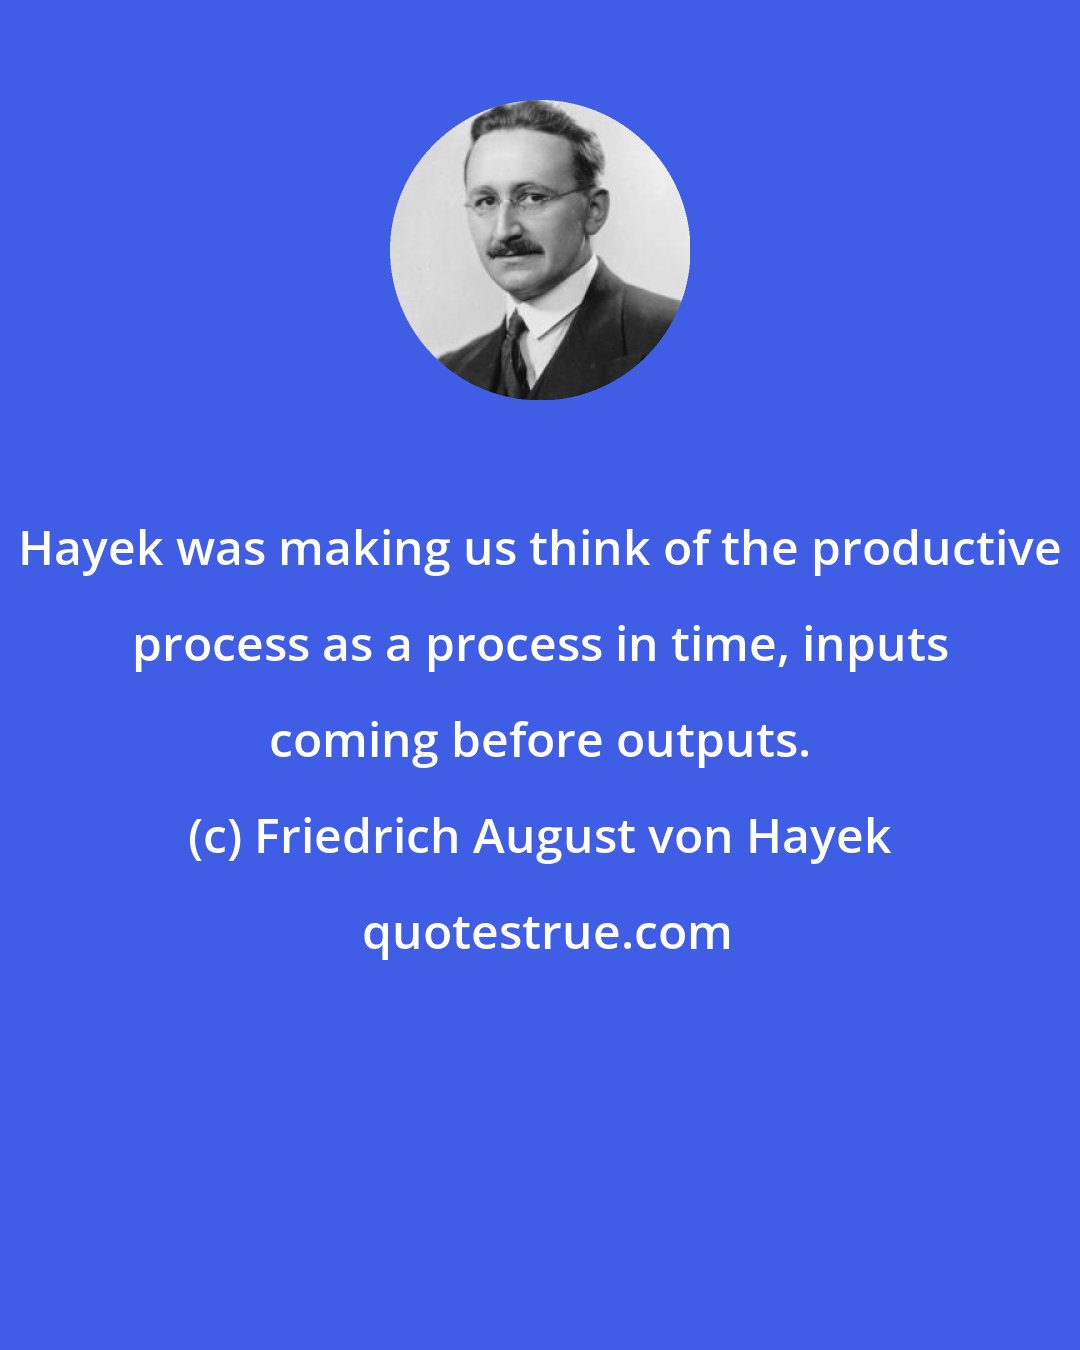 Friedrich August von Hayek: Hayek was making us think of the productive process as a process in time, inputs coming before outputs.